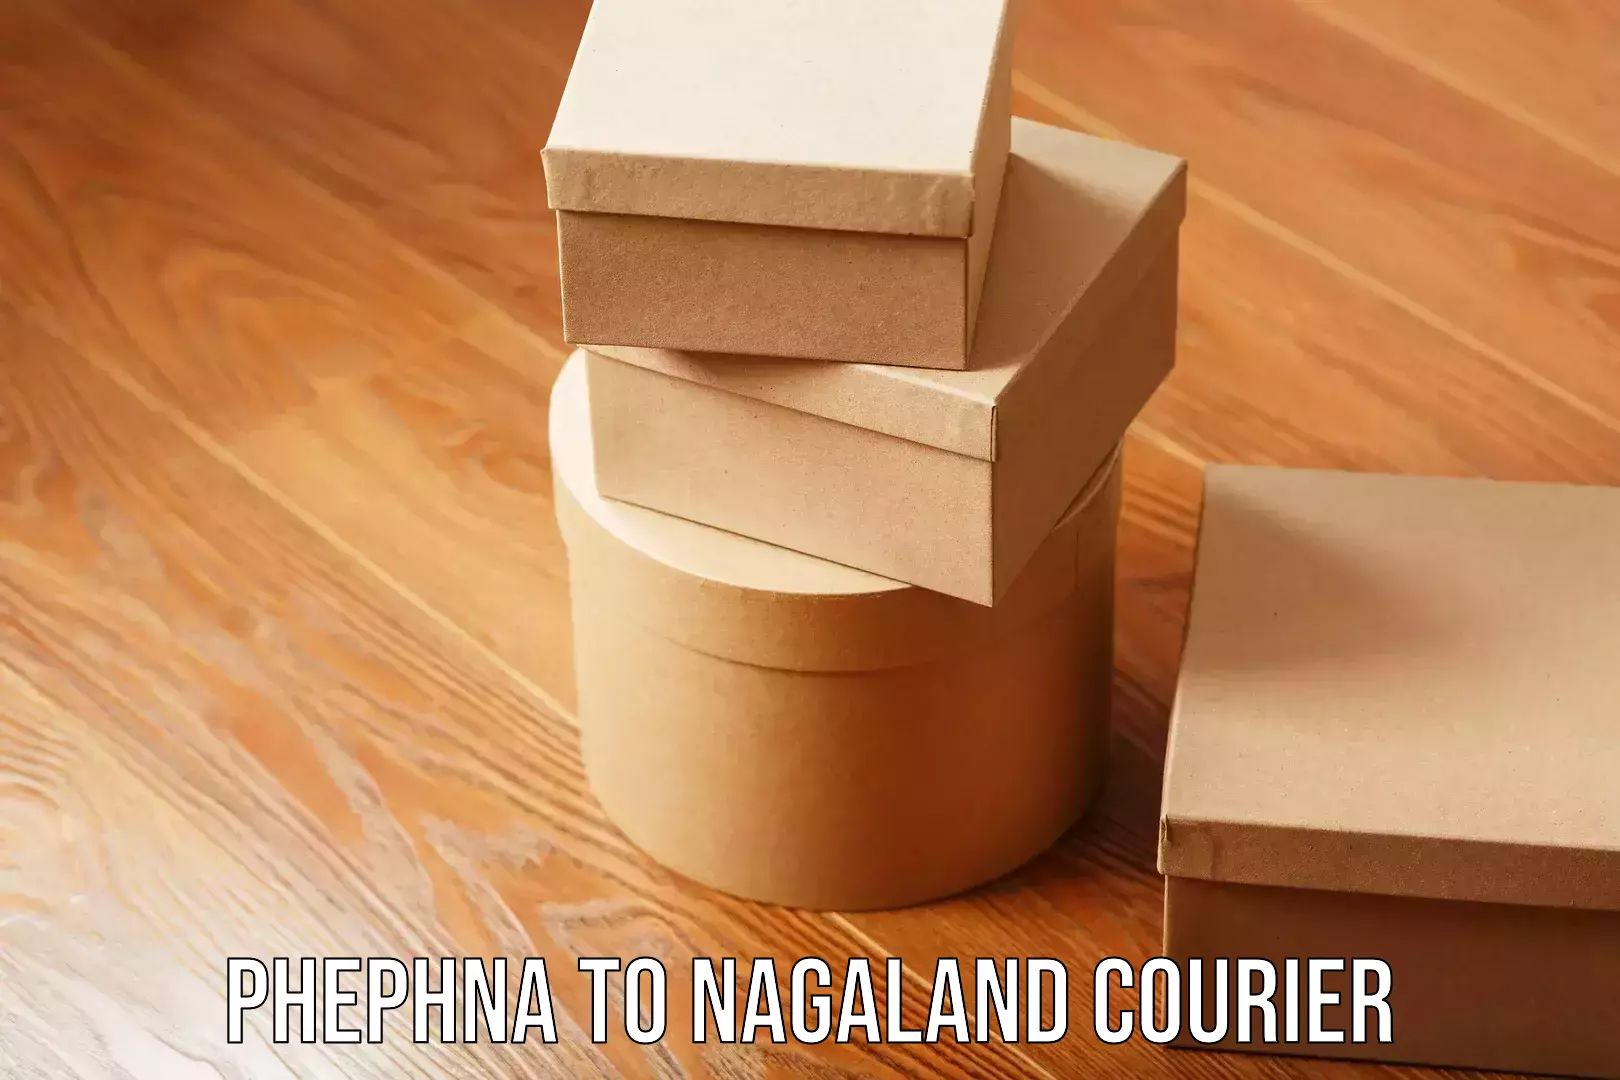 Expert packing and moving Phephna to Nagaland